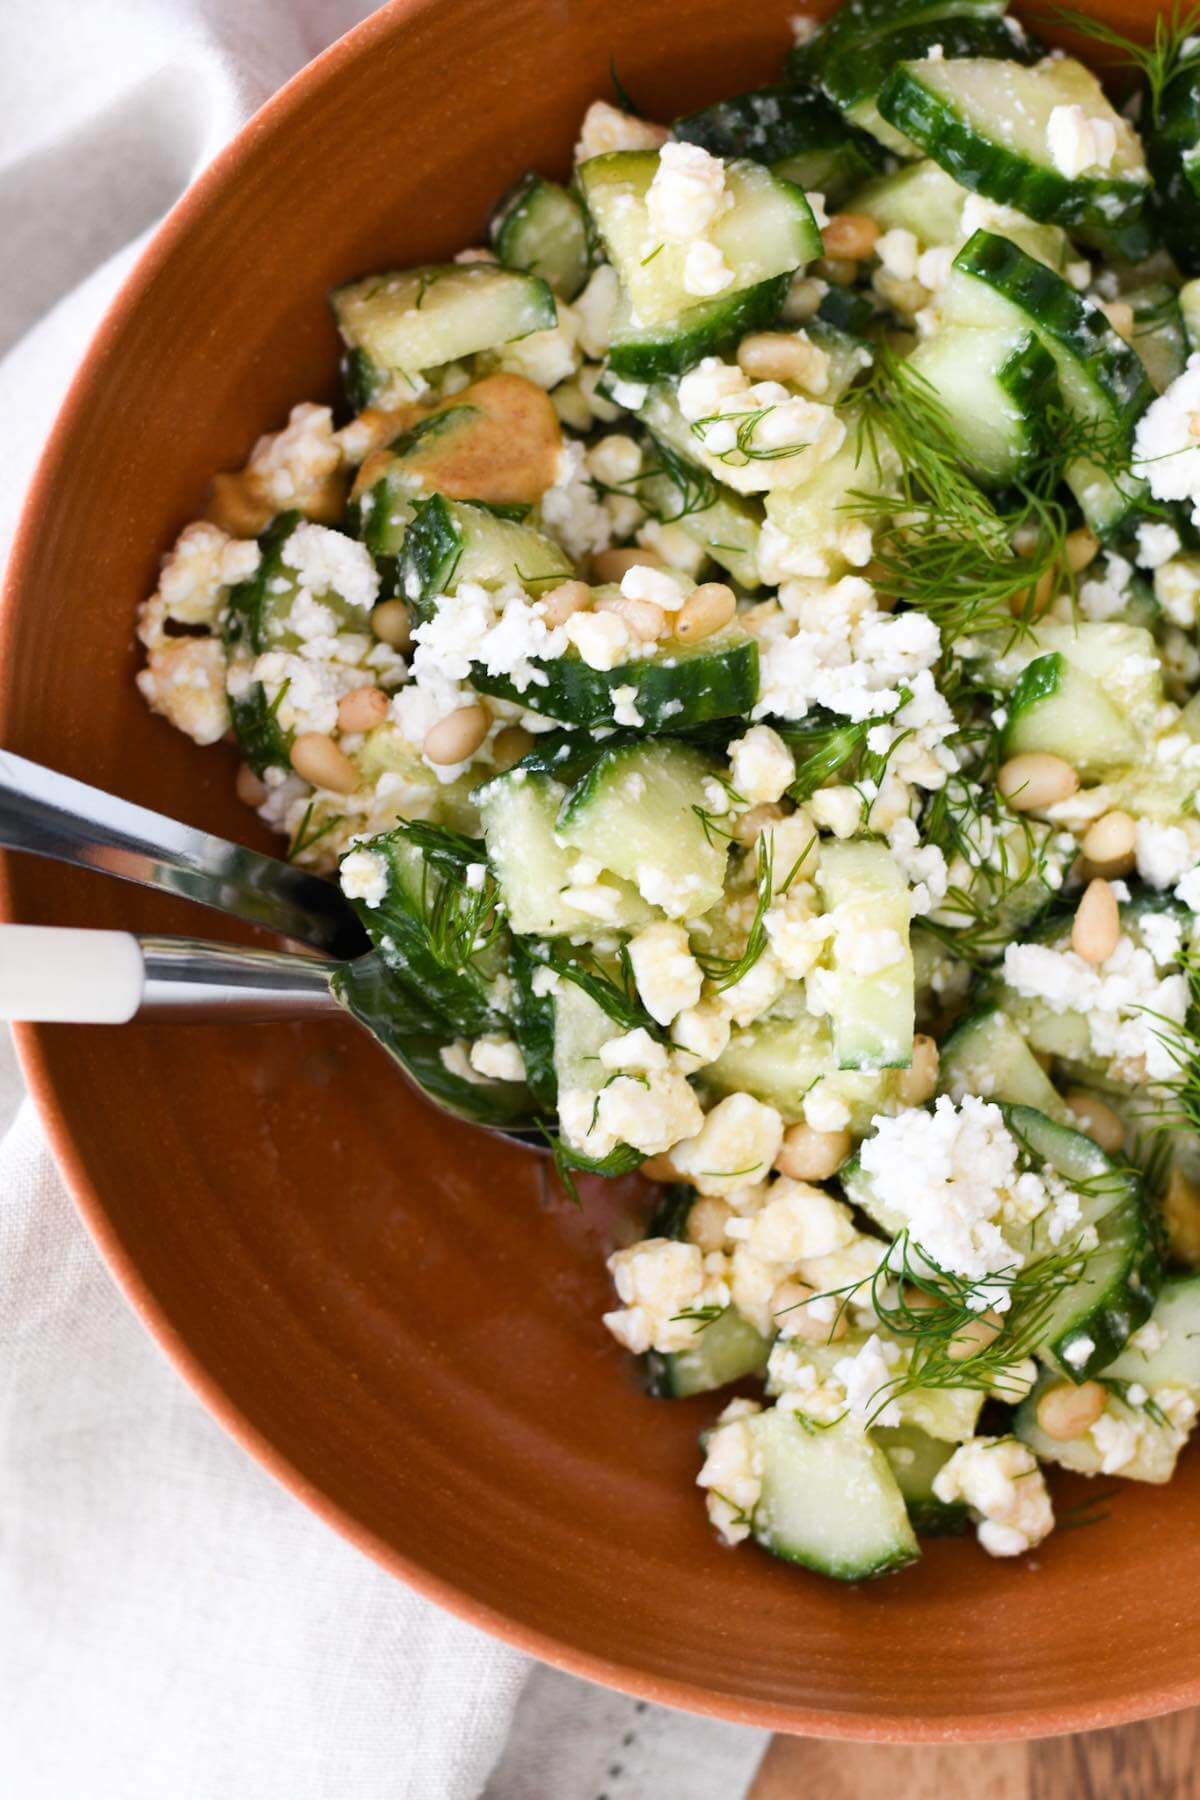 diced cucumbers with crumbled feta cheese, fresh dill, pine nuts and creamy honey mustard dressing in a large bowl.